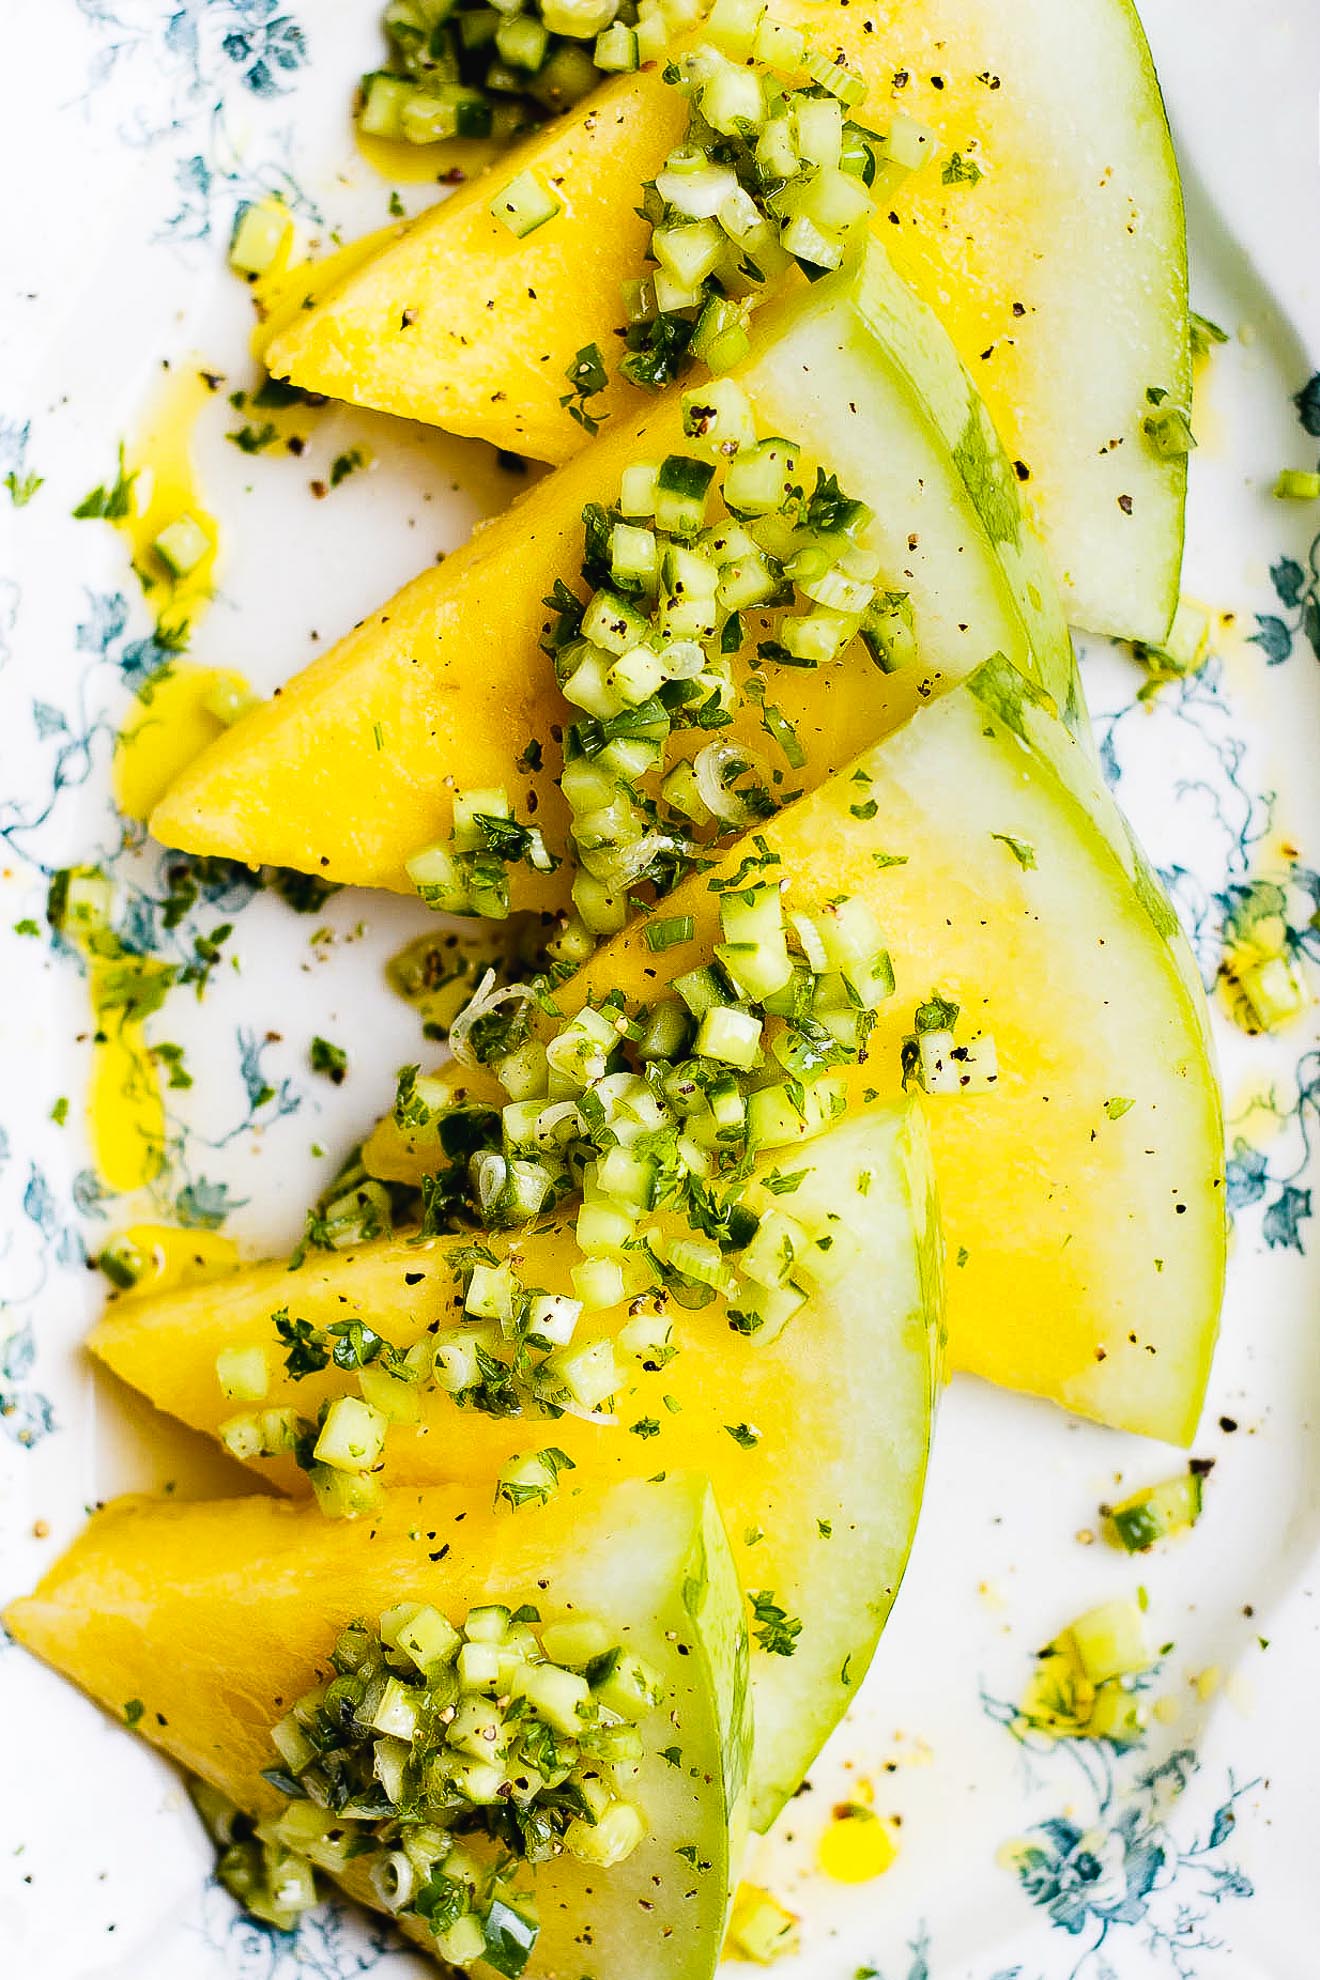 YELLOW WATERMELON SALAD WITH HERBED CUCUMBERS